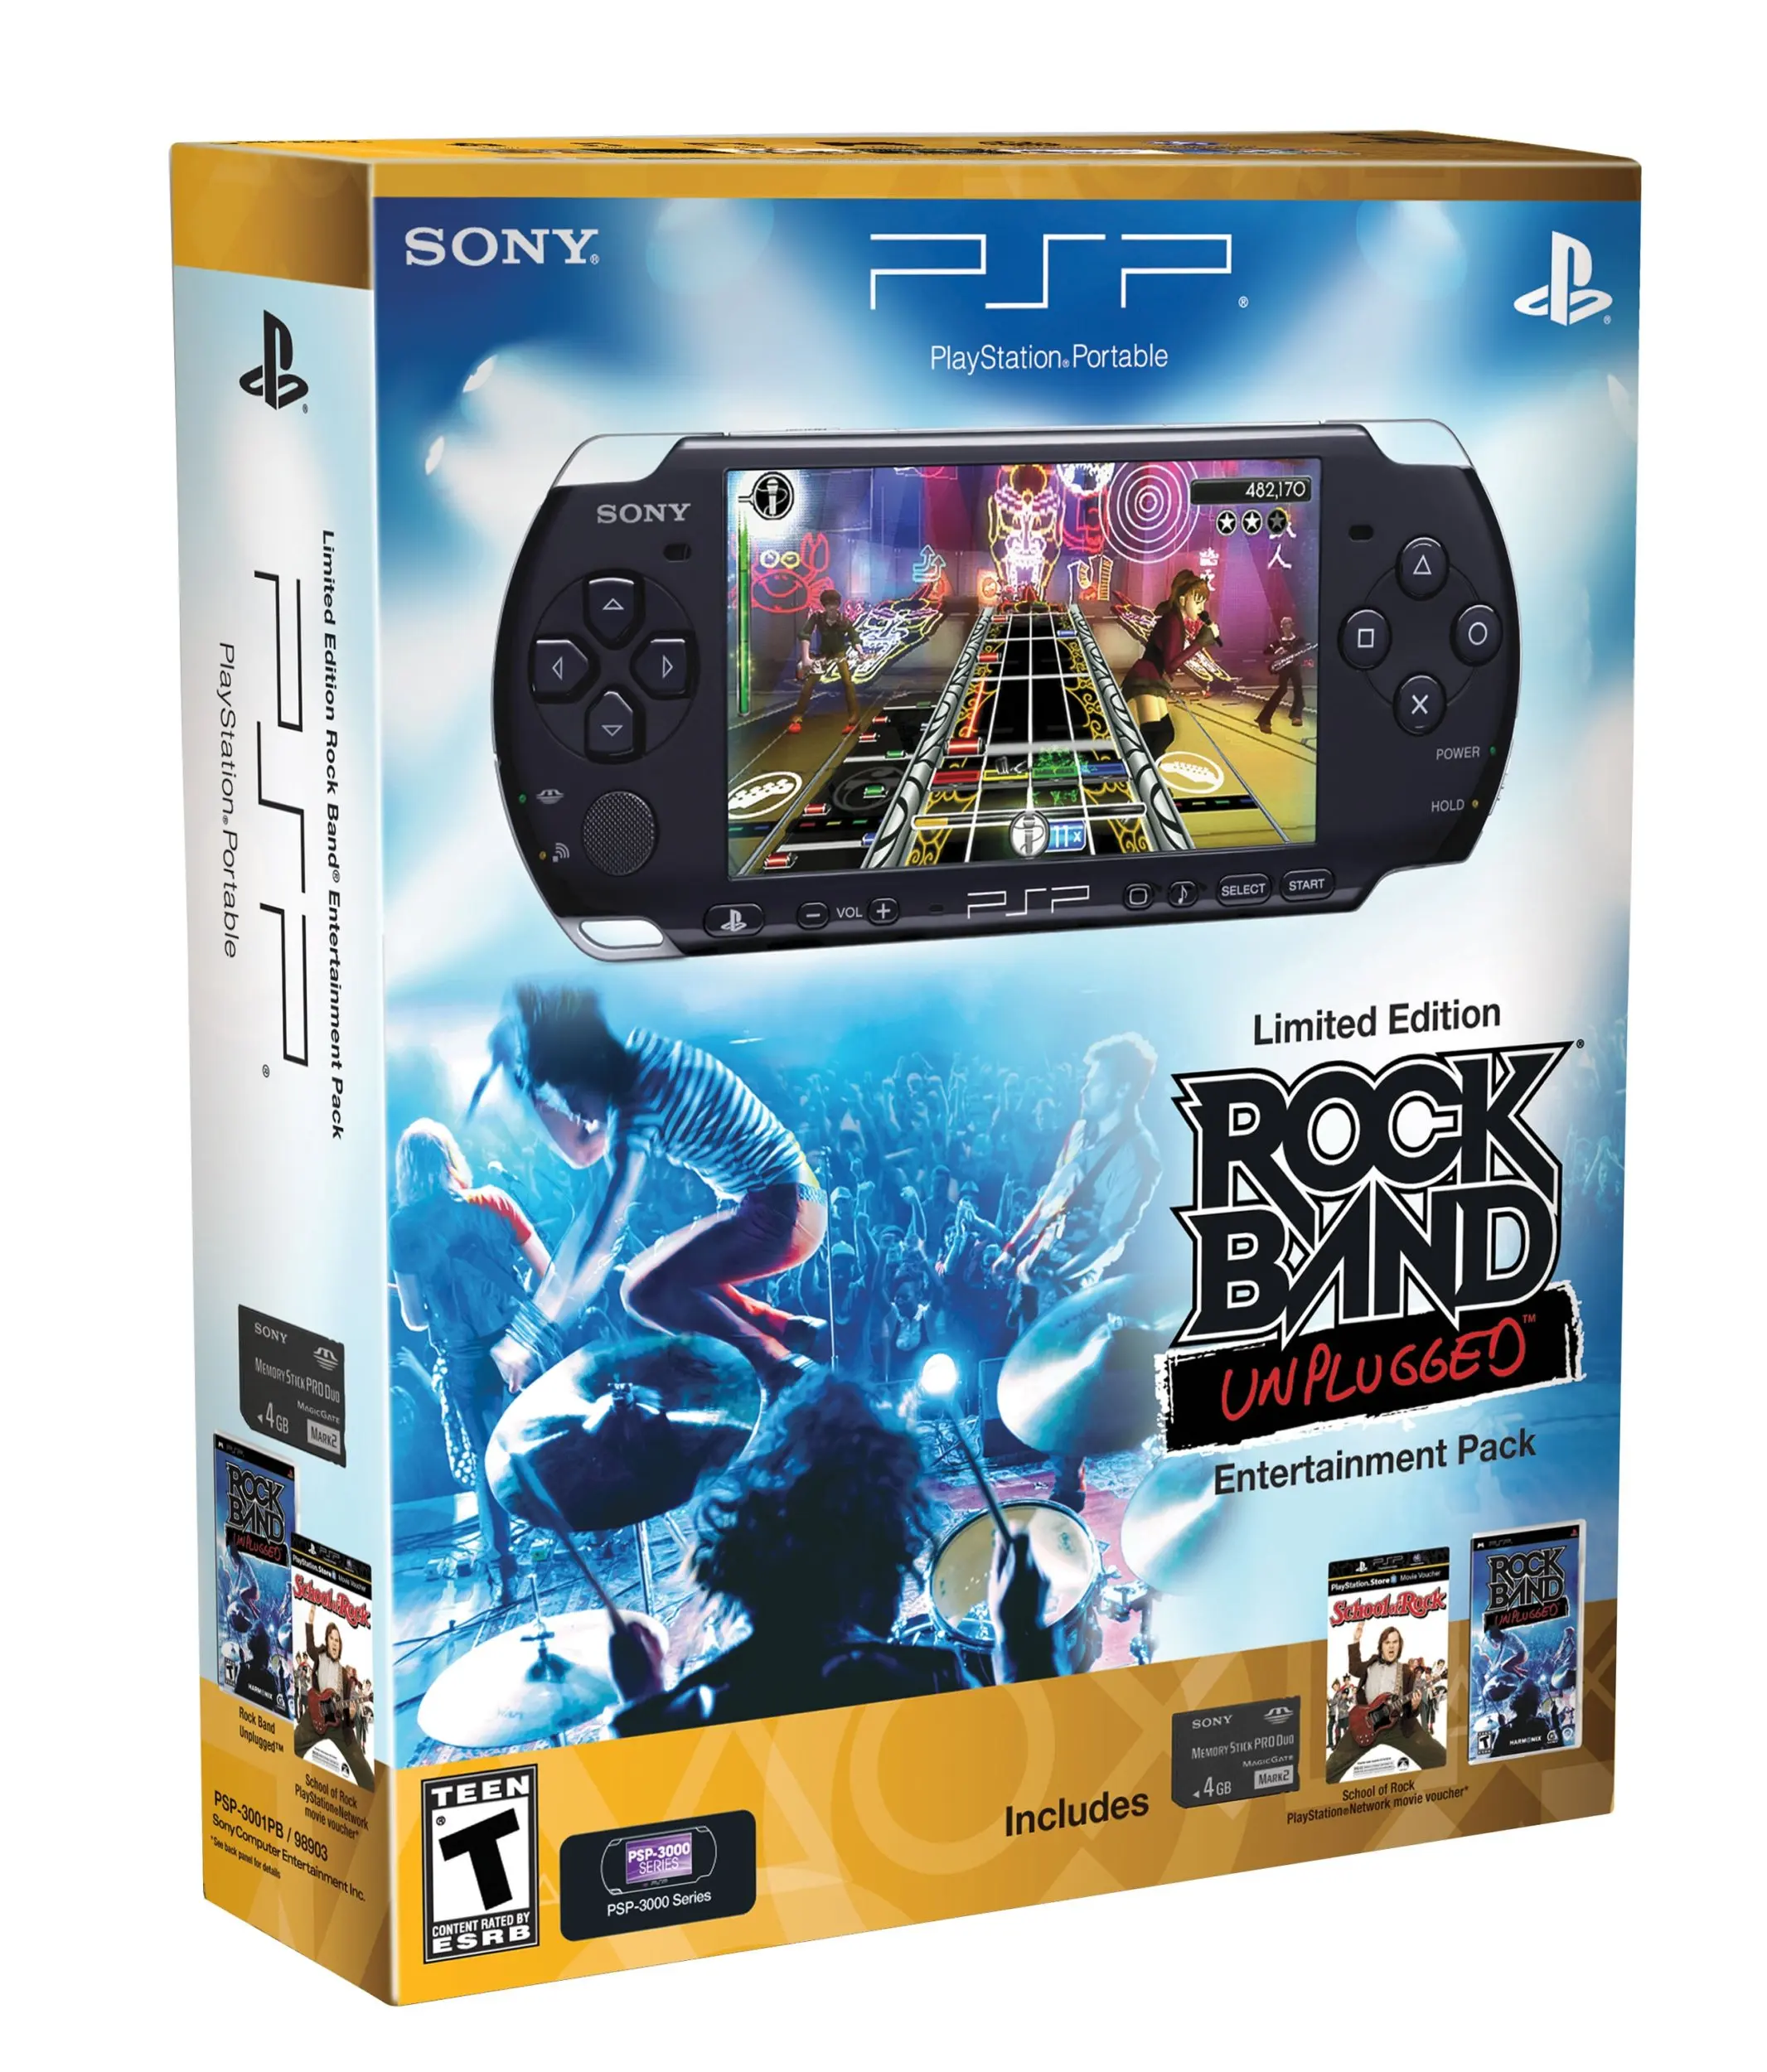 PlayStation Portable Limited Edition Rock Band Unplugged Entertainment Pack - Piano Black. 